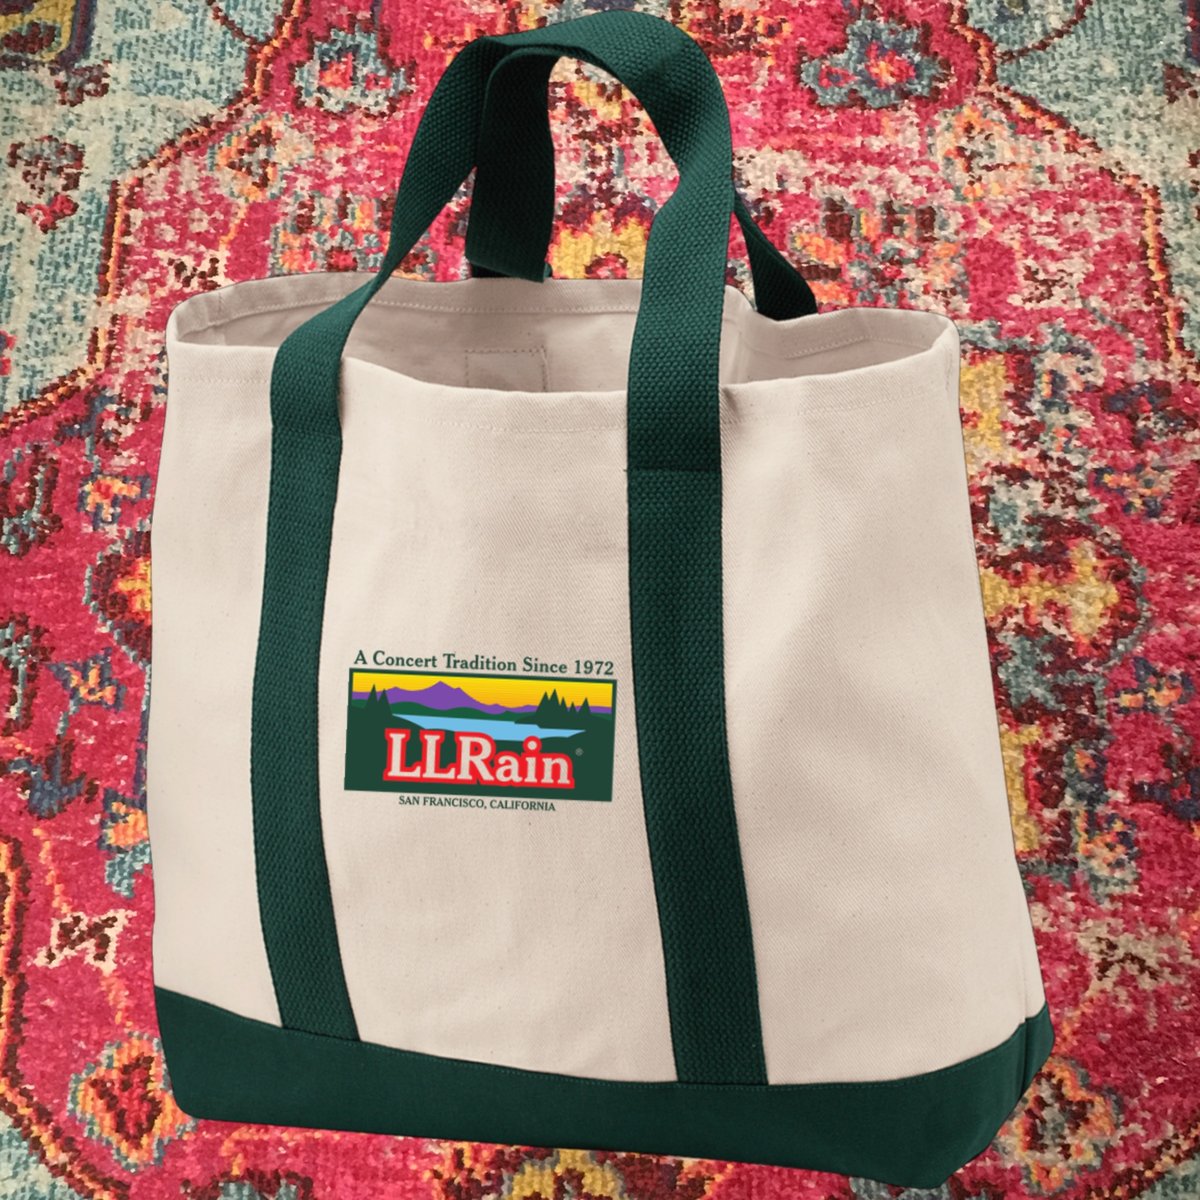 LL Rain Embroidered Tote Bags!!